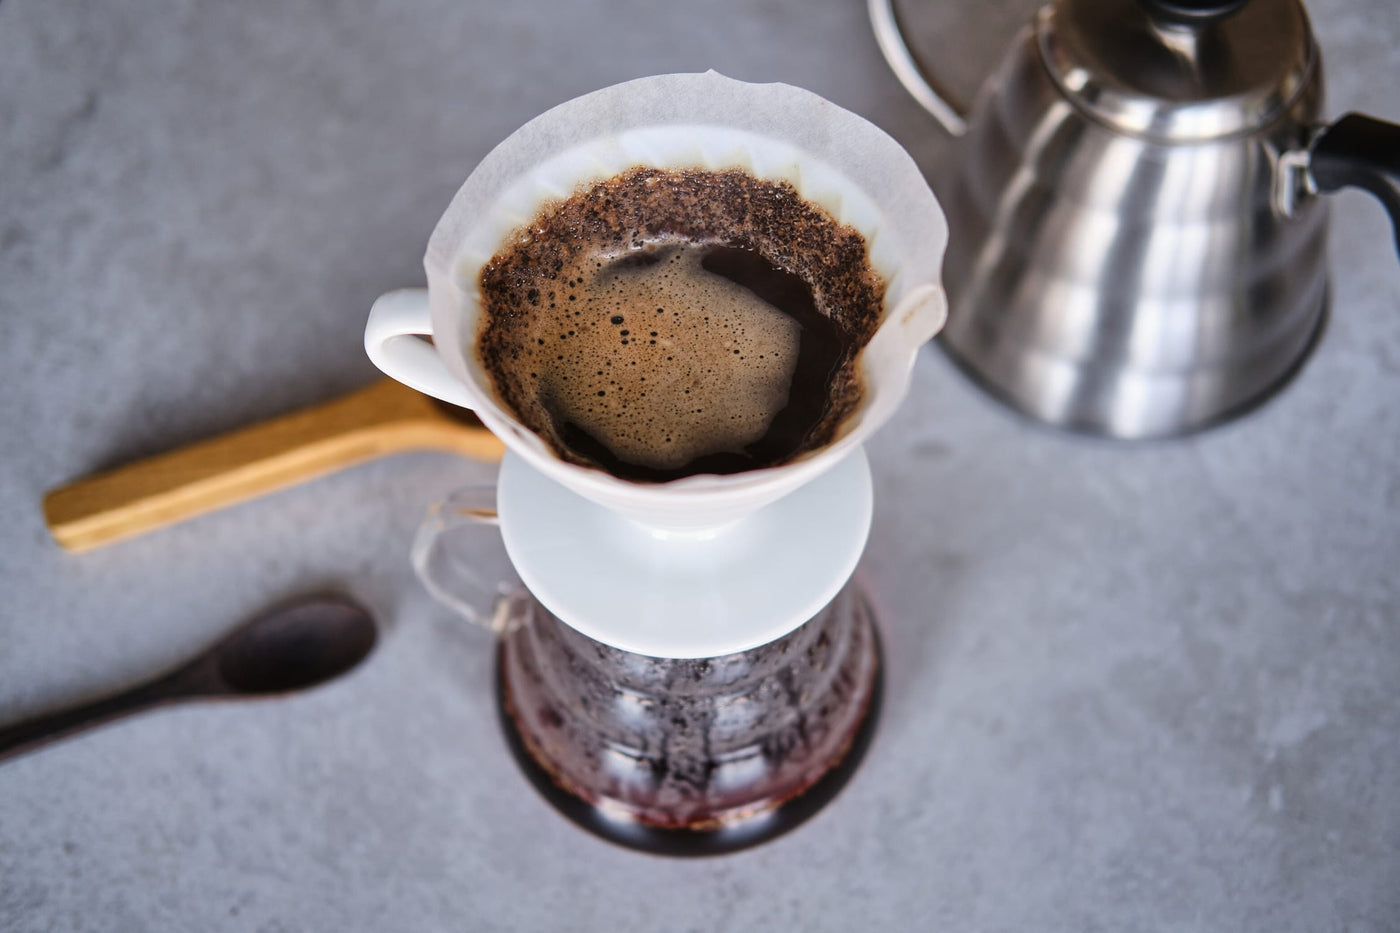 Learn how to brew coffee using the Hario V60